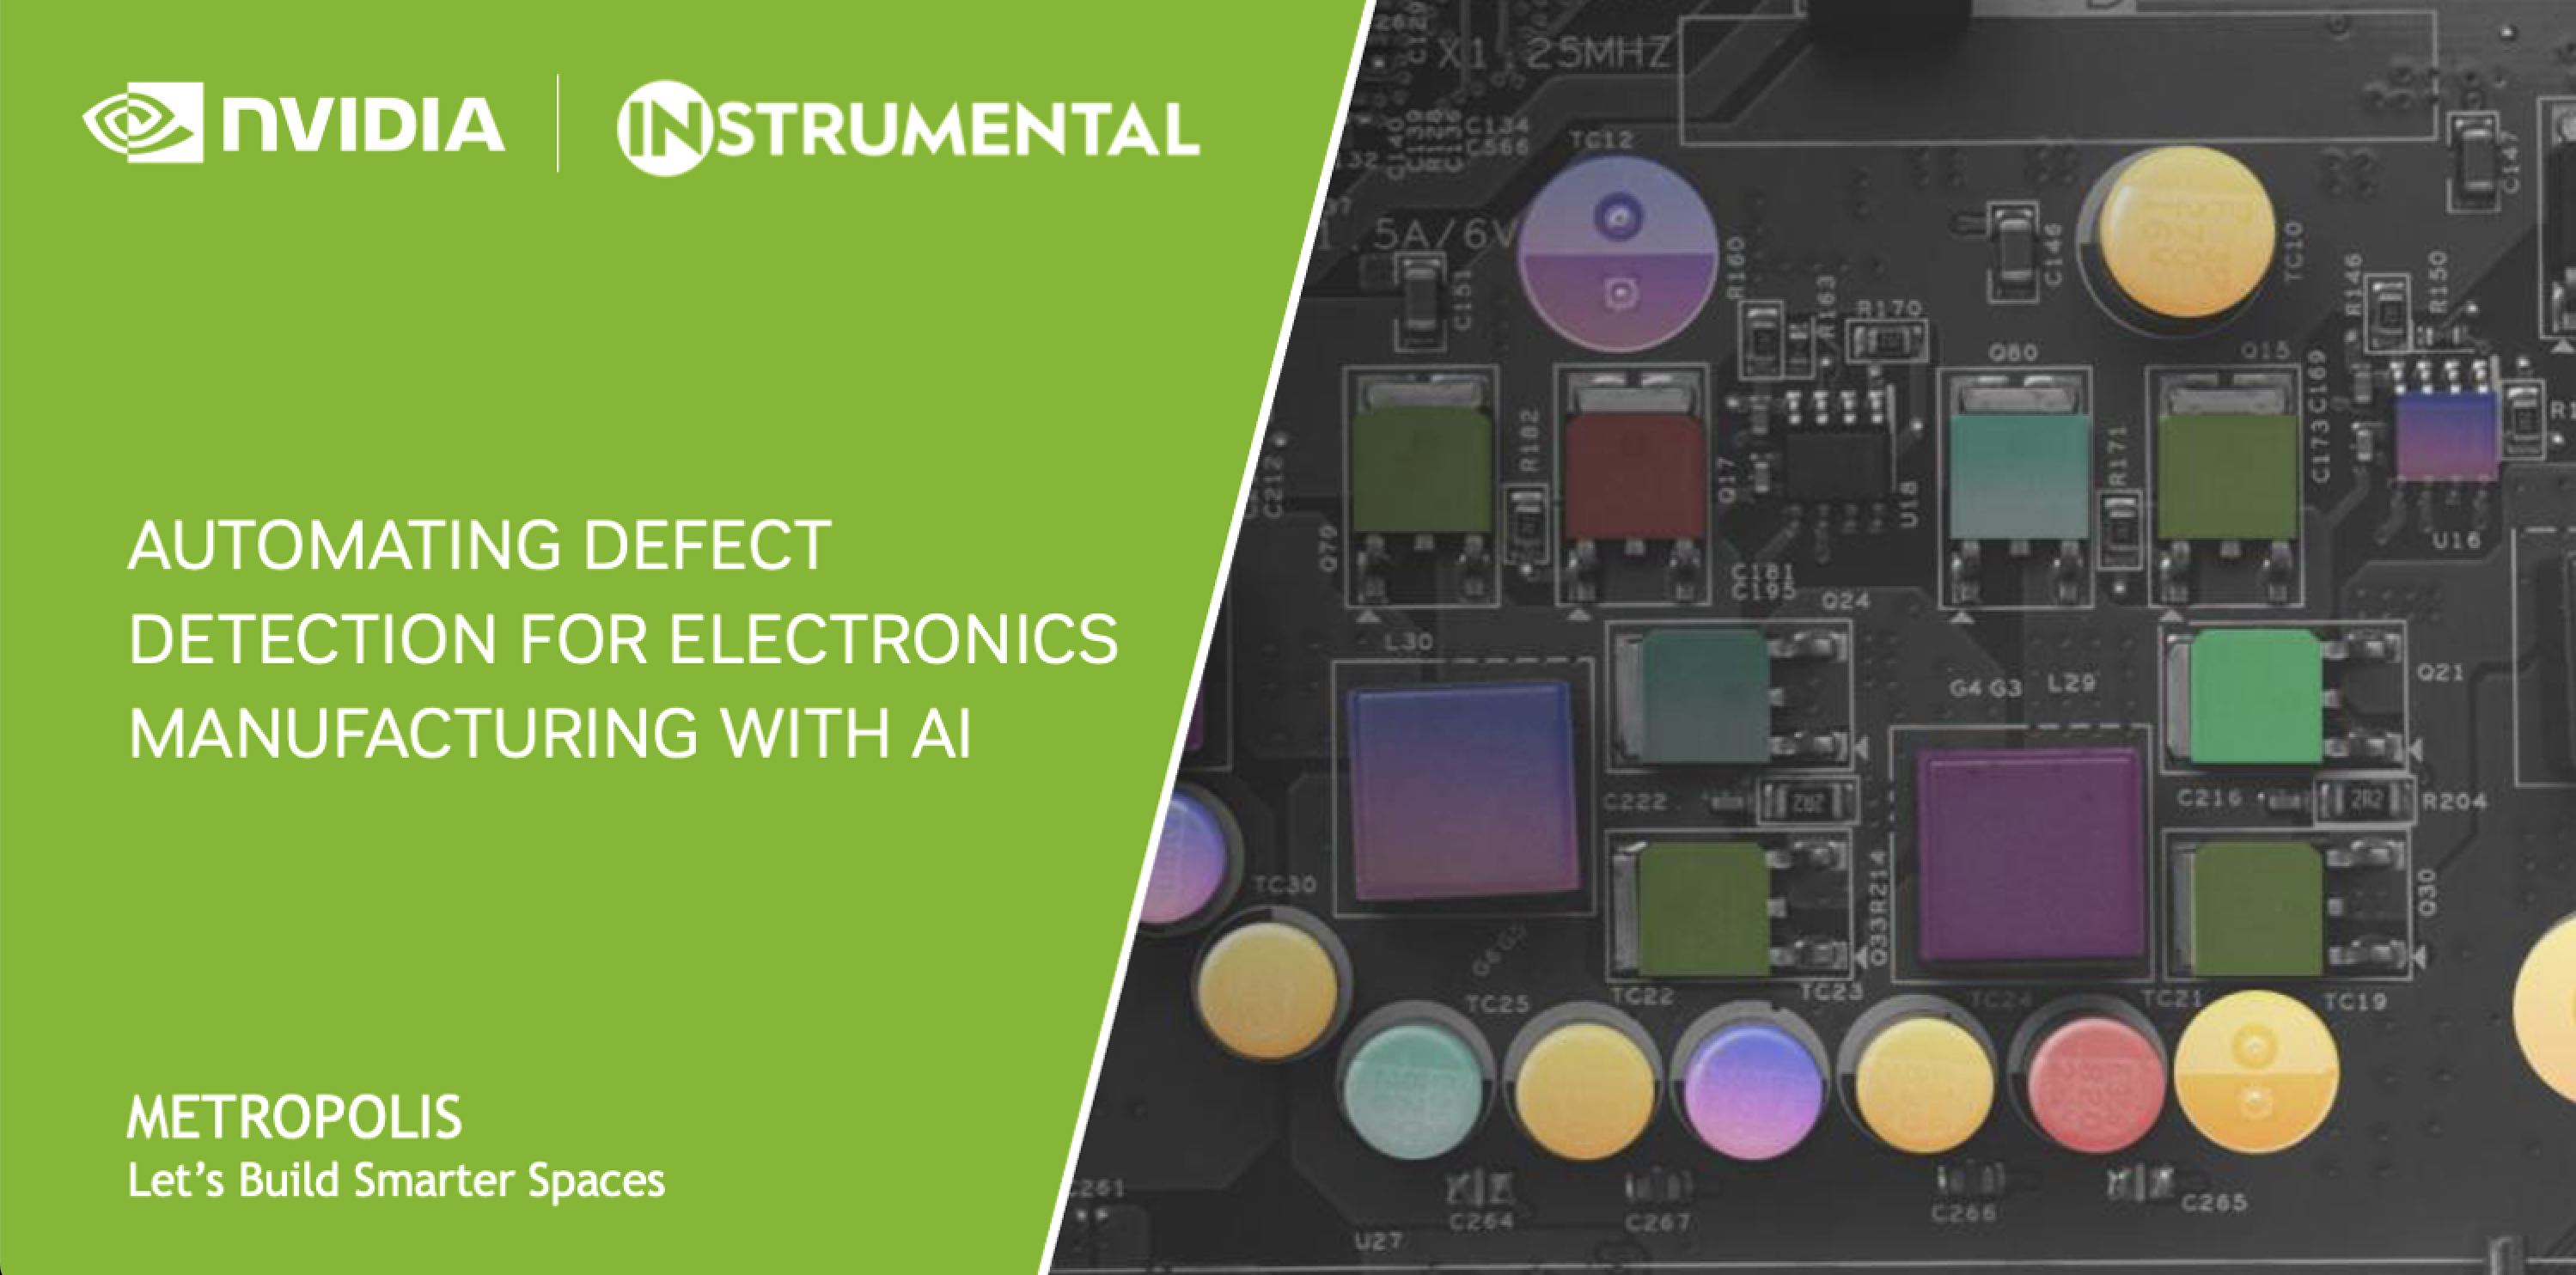 Instrumental joins NVIDIA Metropolis to enable fully automated defect detection for complex electronics assembly